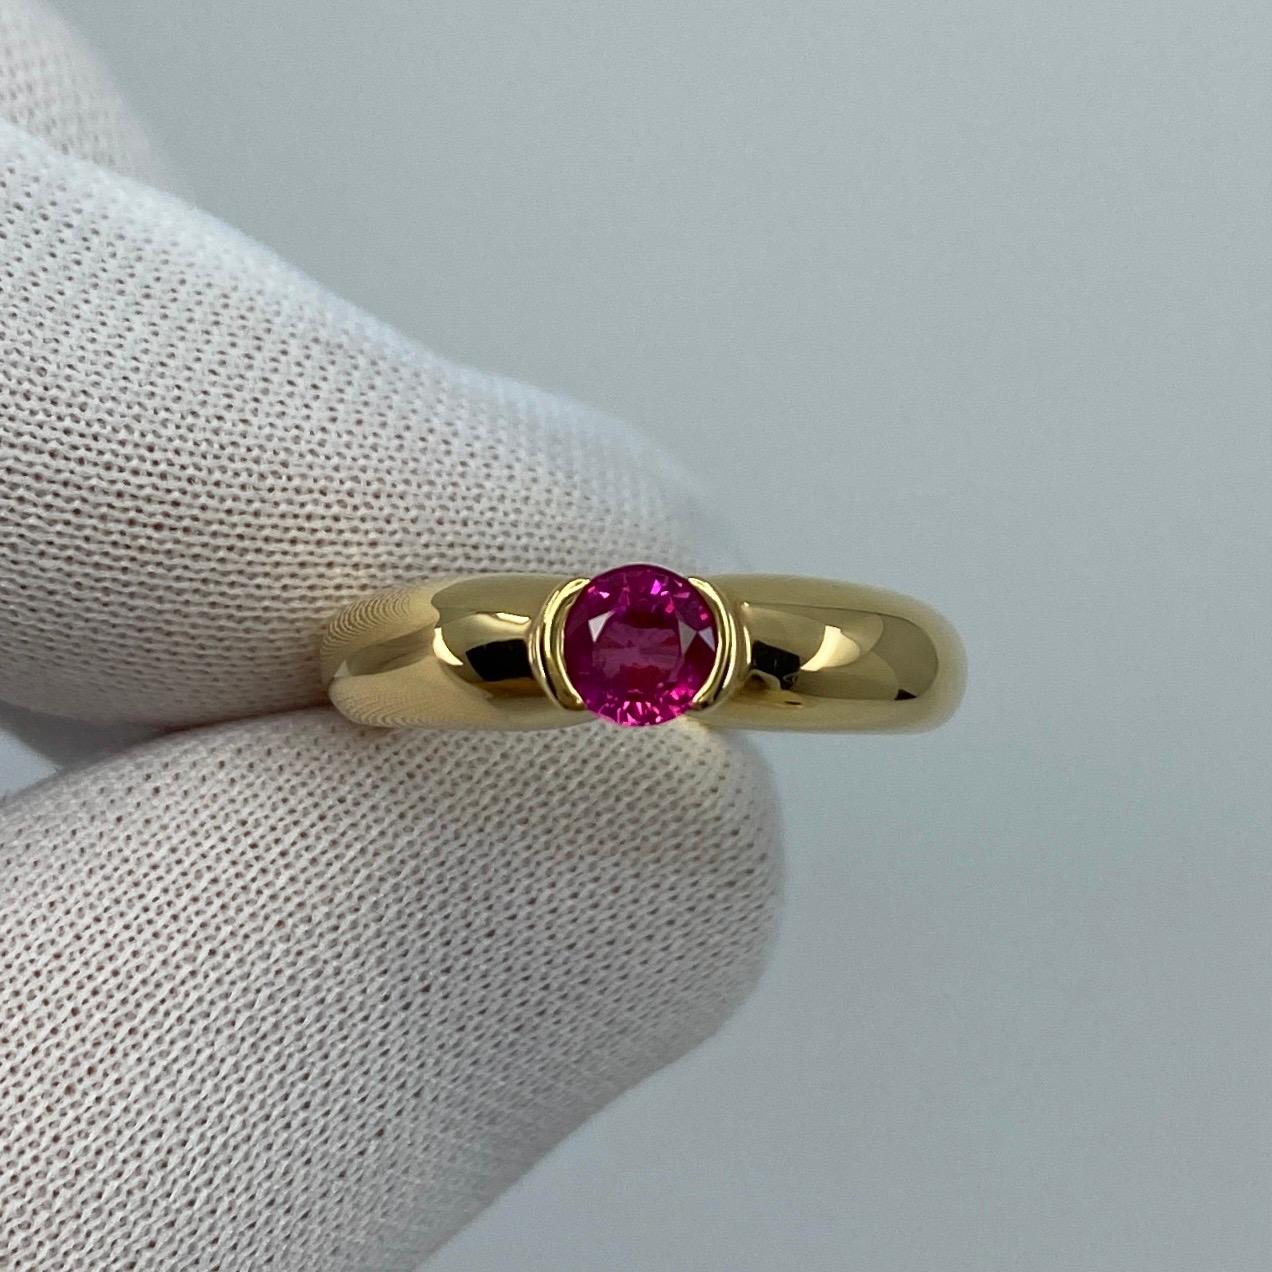 Vintage Cartier Vivid Pink Red Ruby 18k Yellow Gold Solitaire Ring.

Stunning yellow gold ring set with a fine vivid pink red ruby. Fine jewellery houses like Cartier only use the finest of gemstones and this ruby is no exception. A top quality ruby